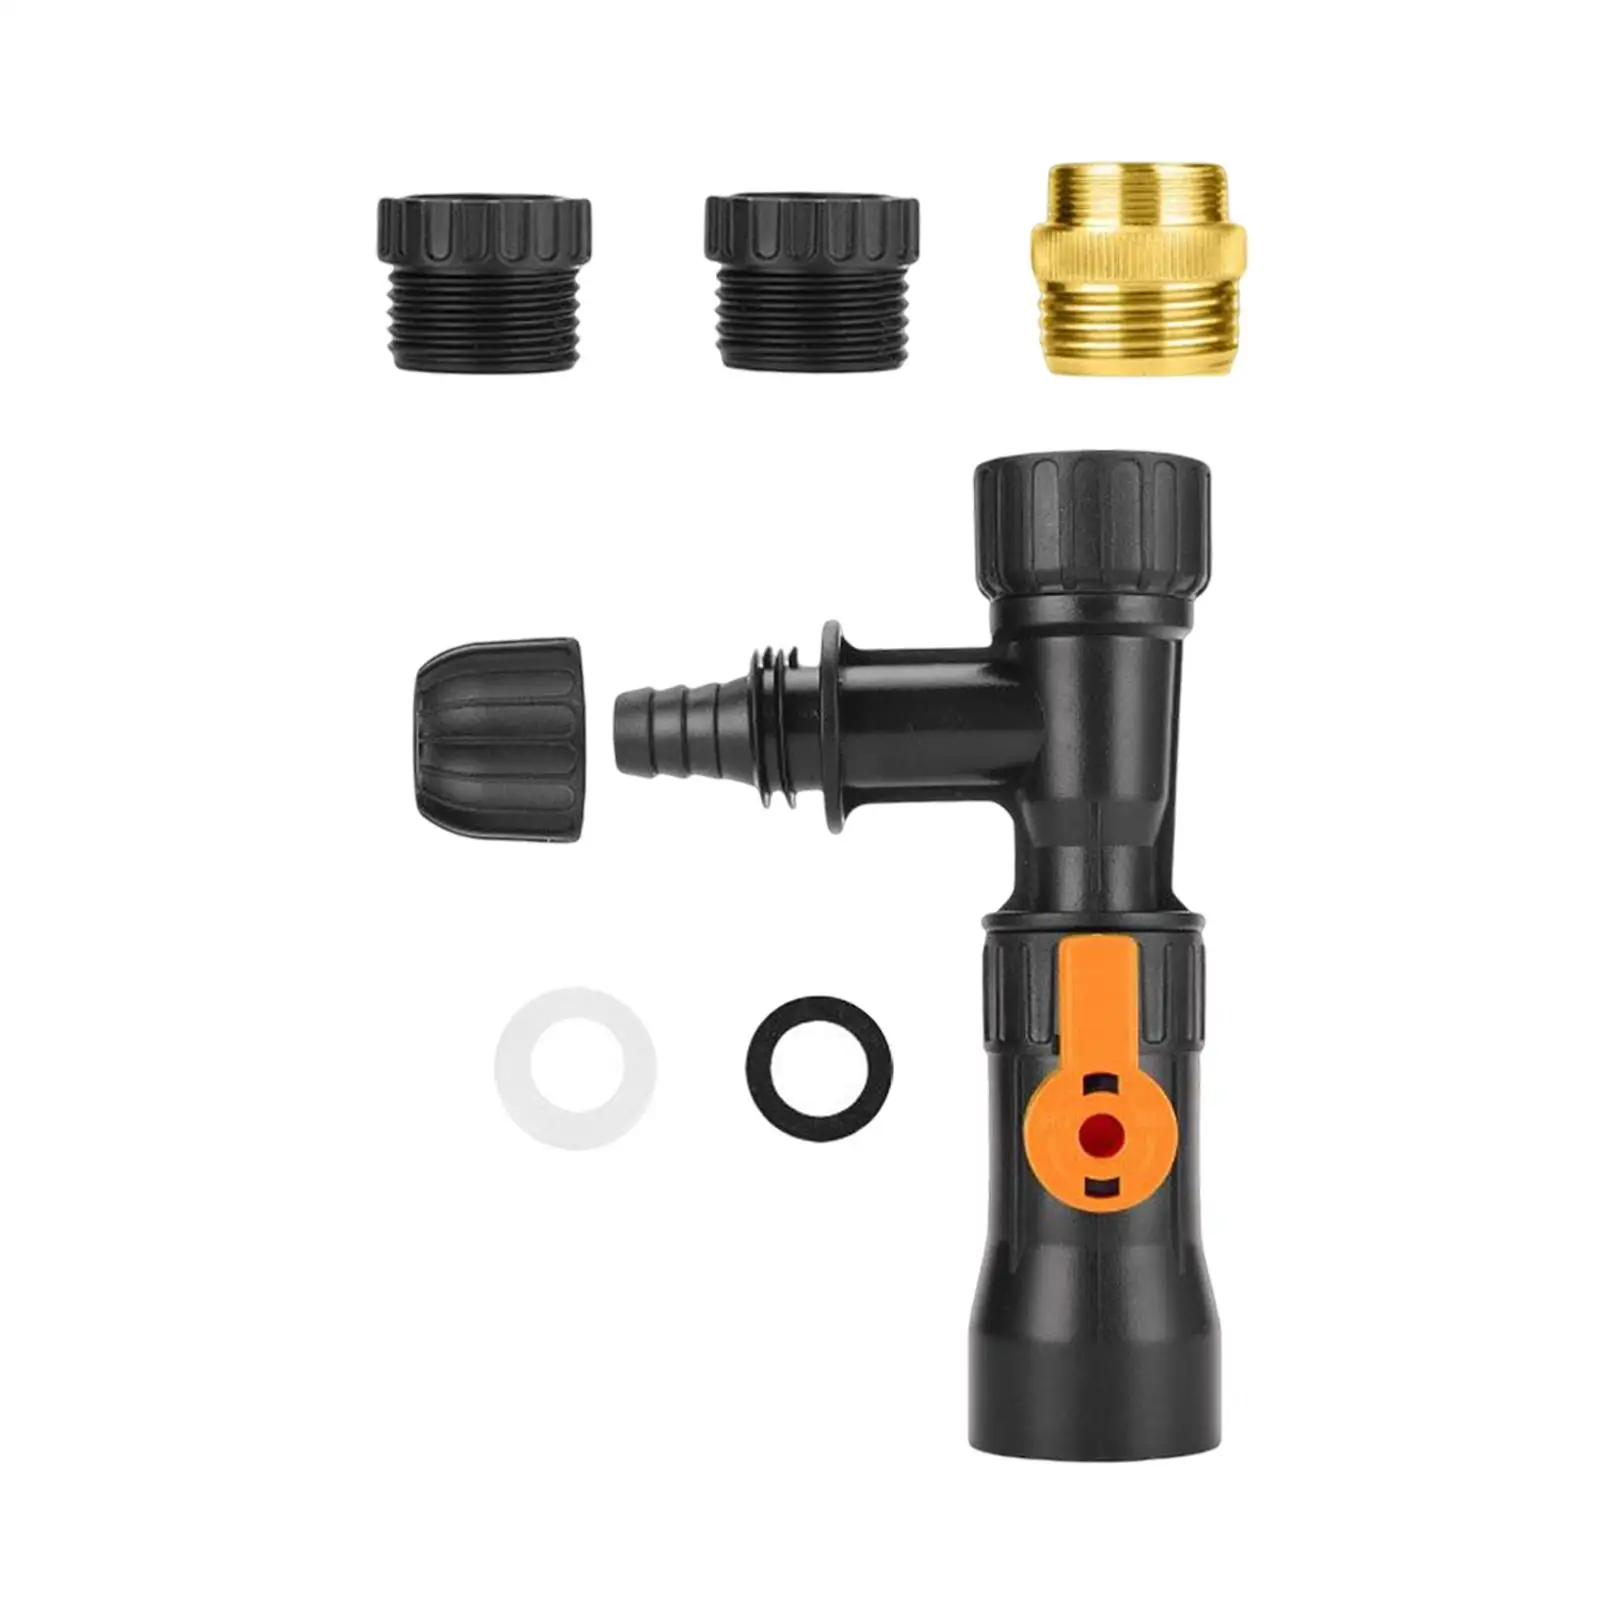 Aquarium Hose Water Changer with 4 Faucet Adapter Fittings Water Change Tool